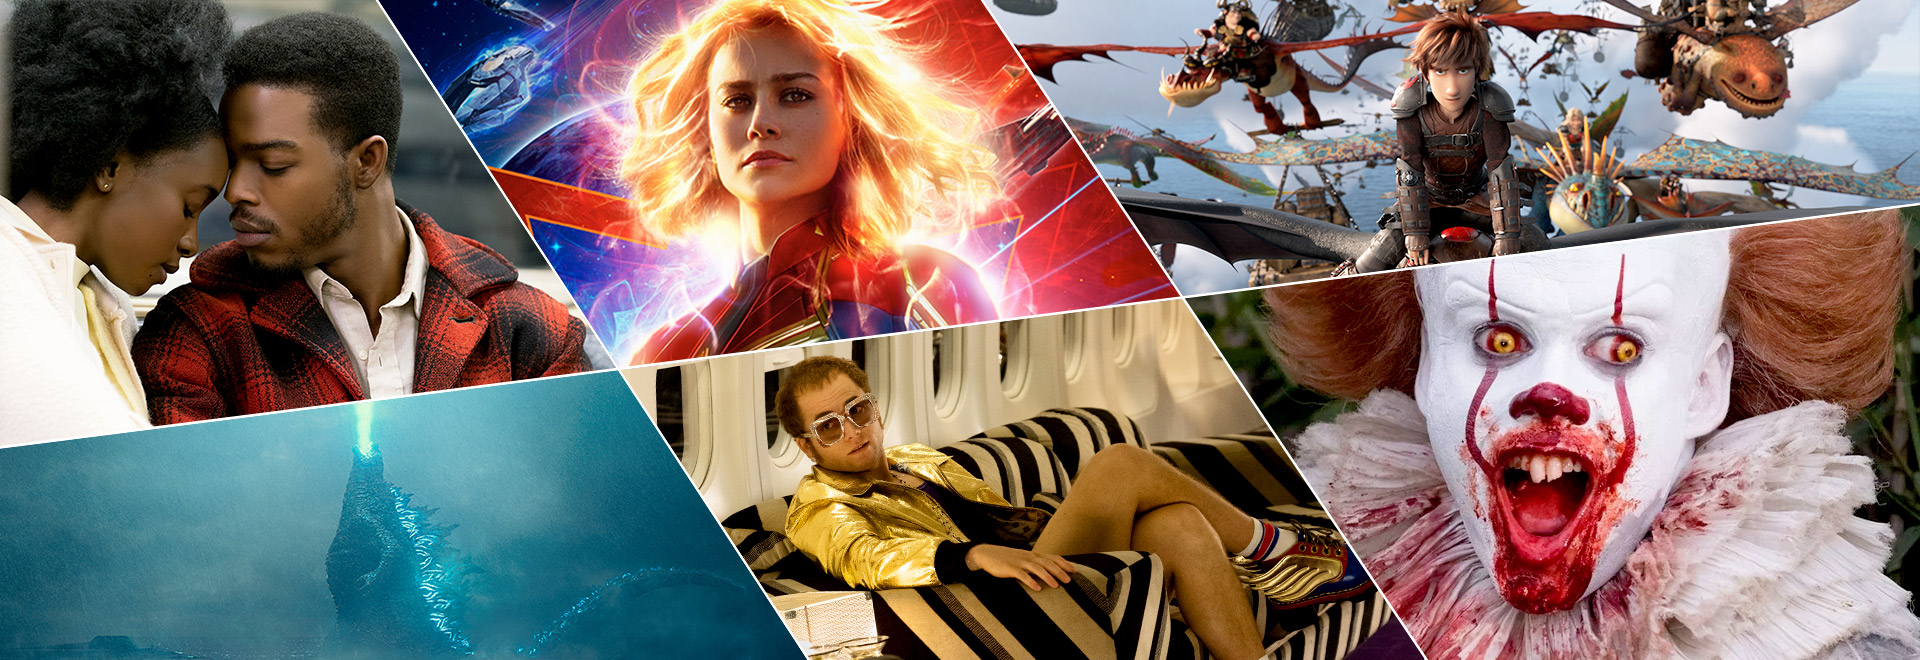 Most anticipated films of 2019 - Must-see movies for the coming year